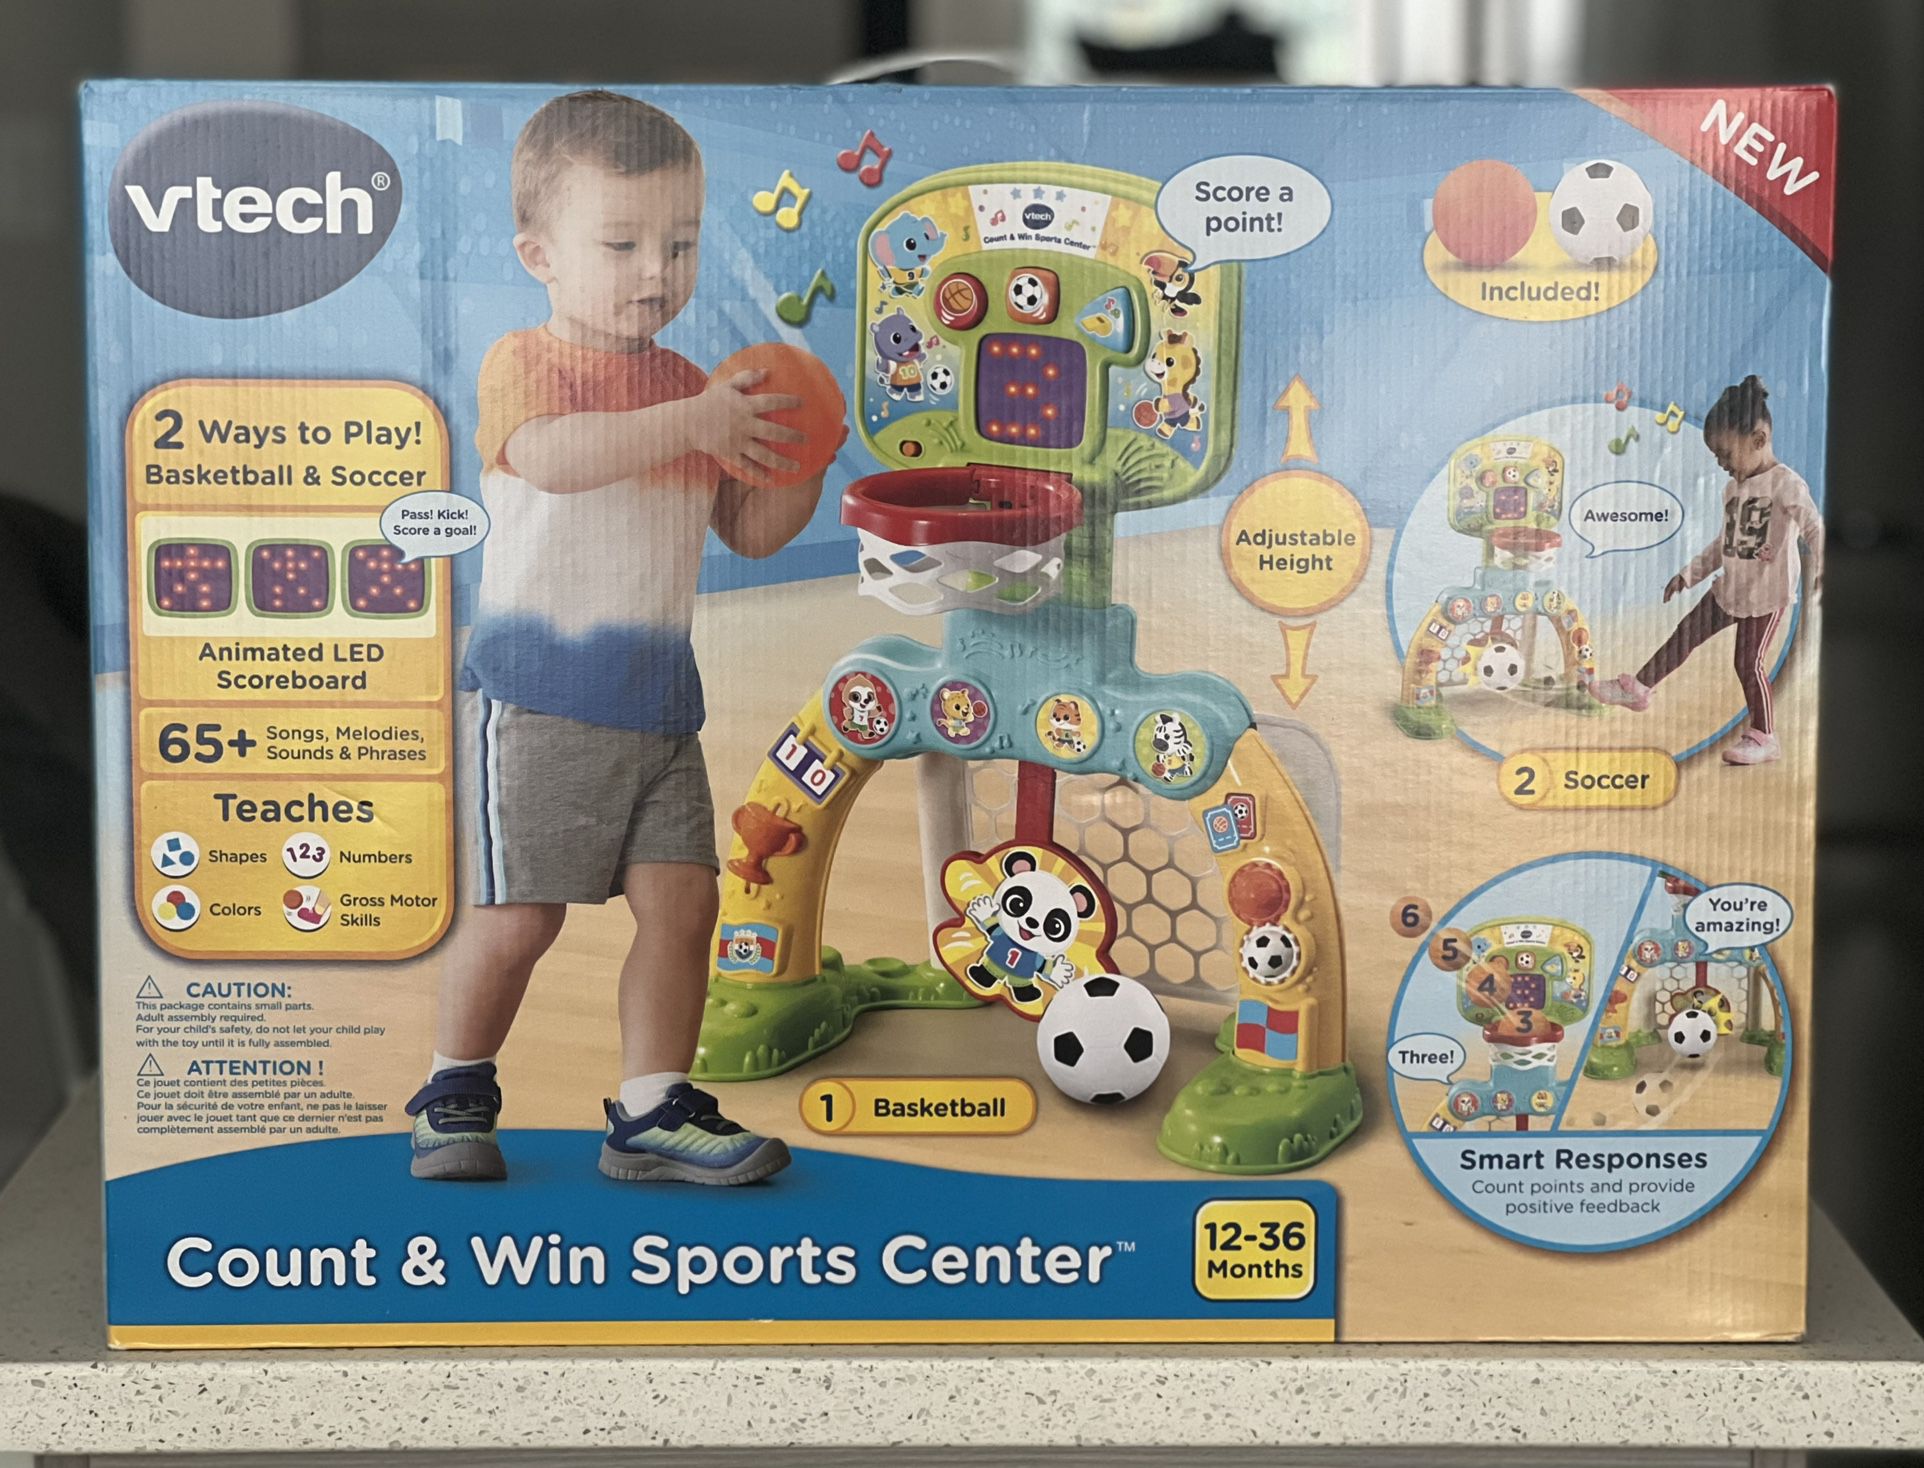 vtech shoot score and learn